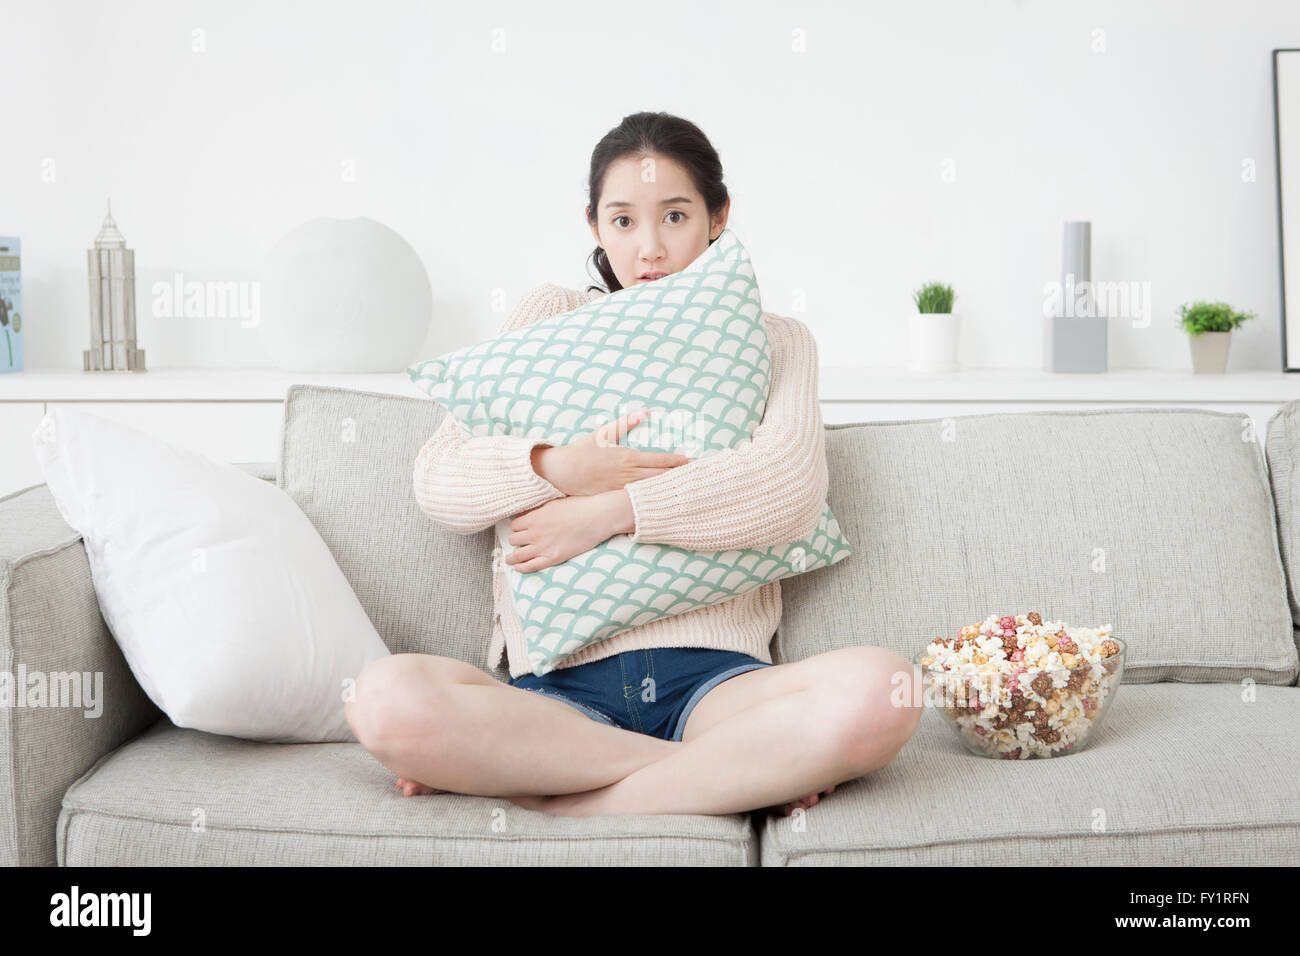 https://c8.alamy.com/comp/FY1RFN/young-woman-sitting-on-sofa-hugging-a-cushion-with-frightened-face-FY1RFN.jpg